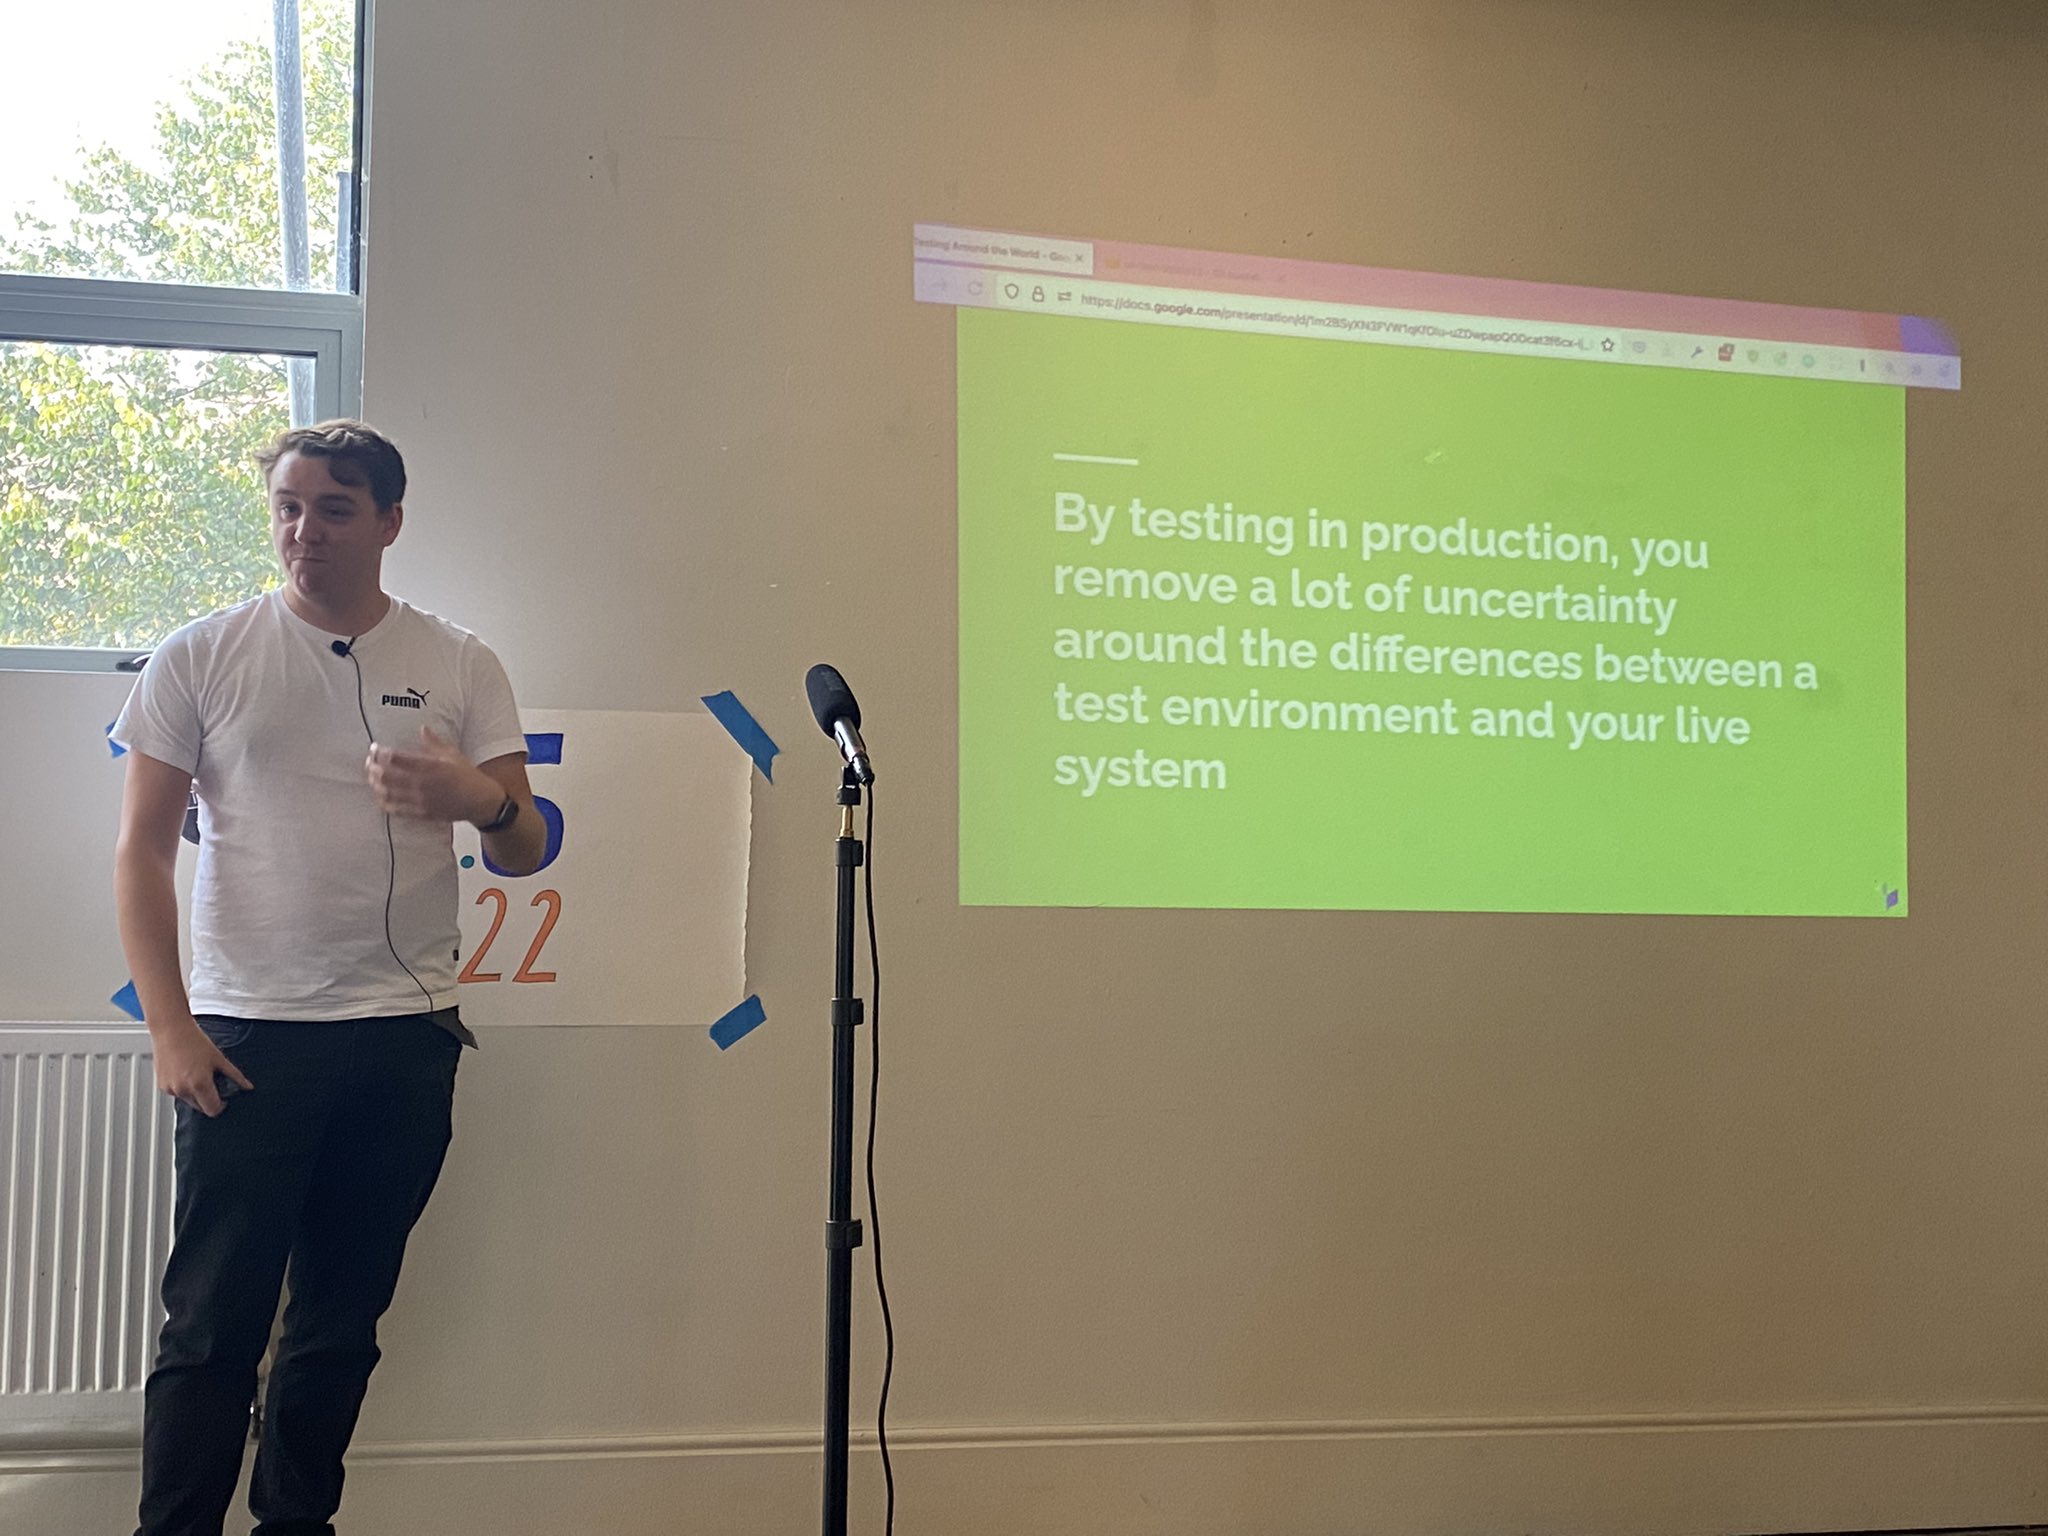 Testing around the world in production by Joe Stead